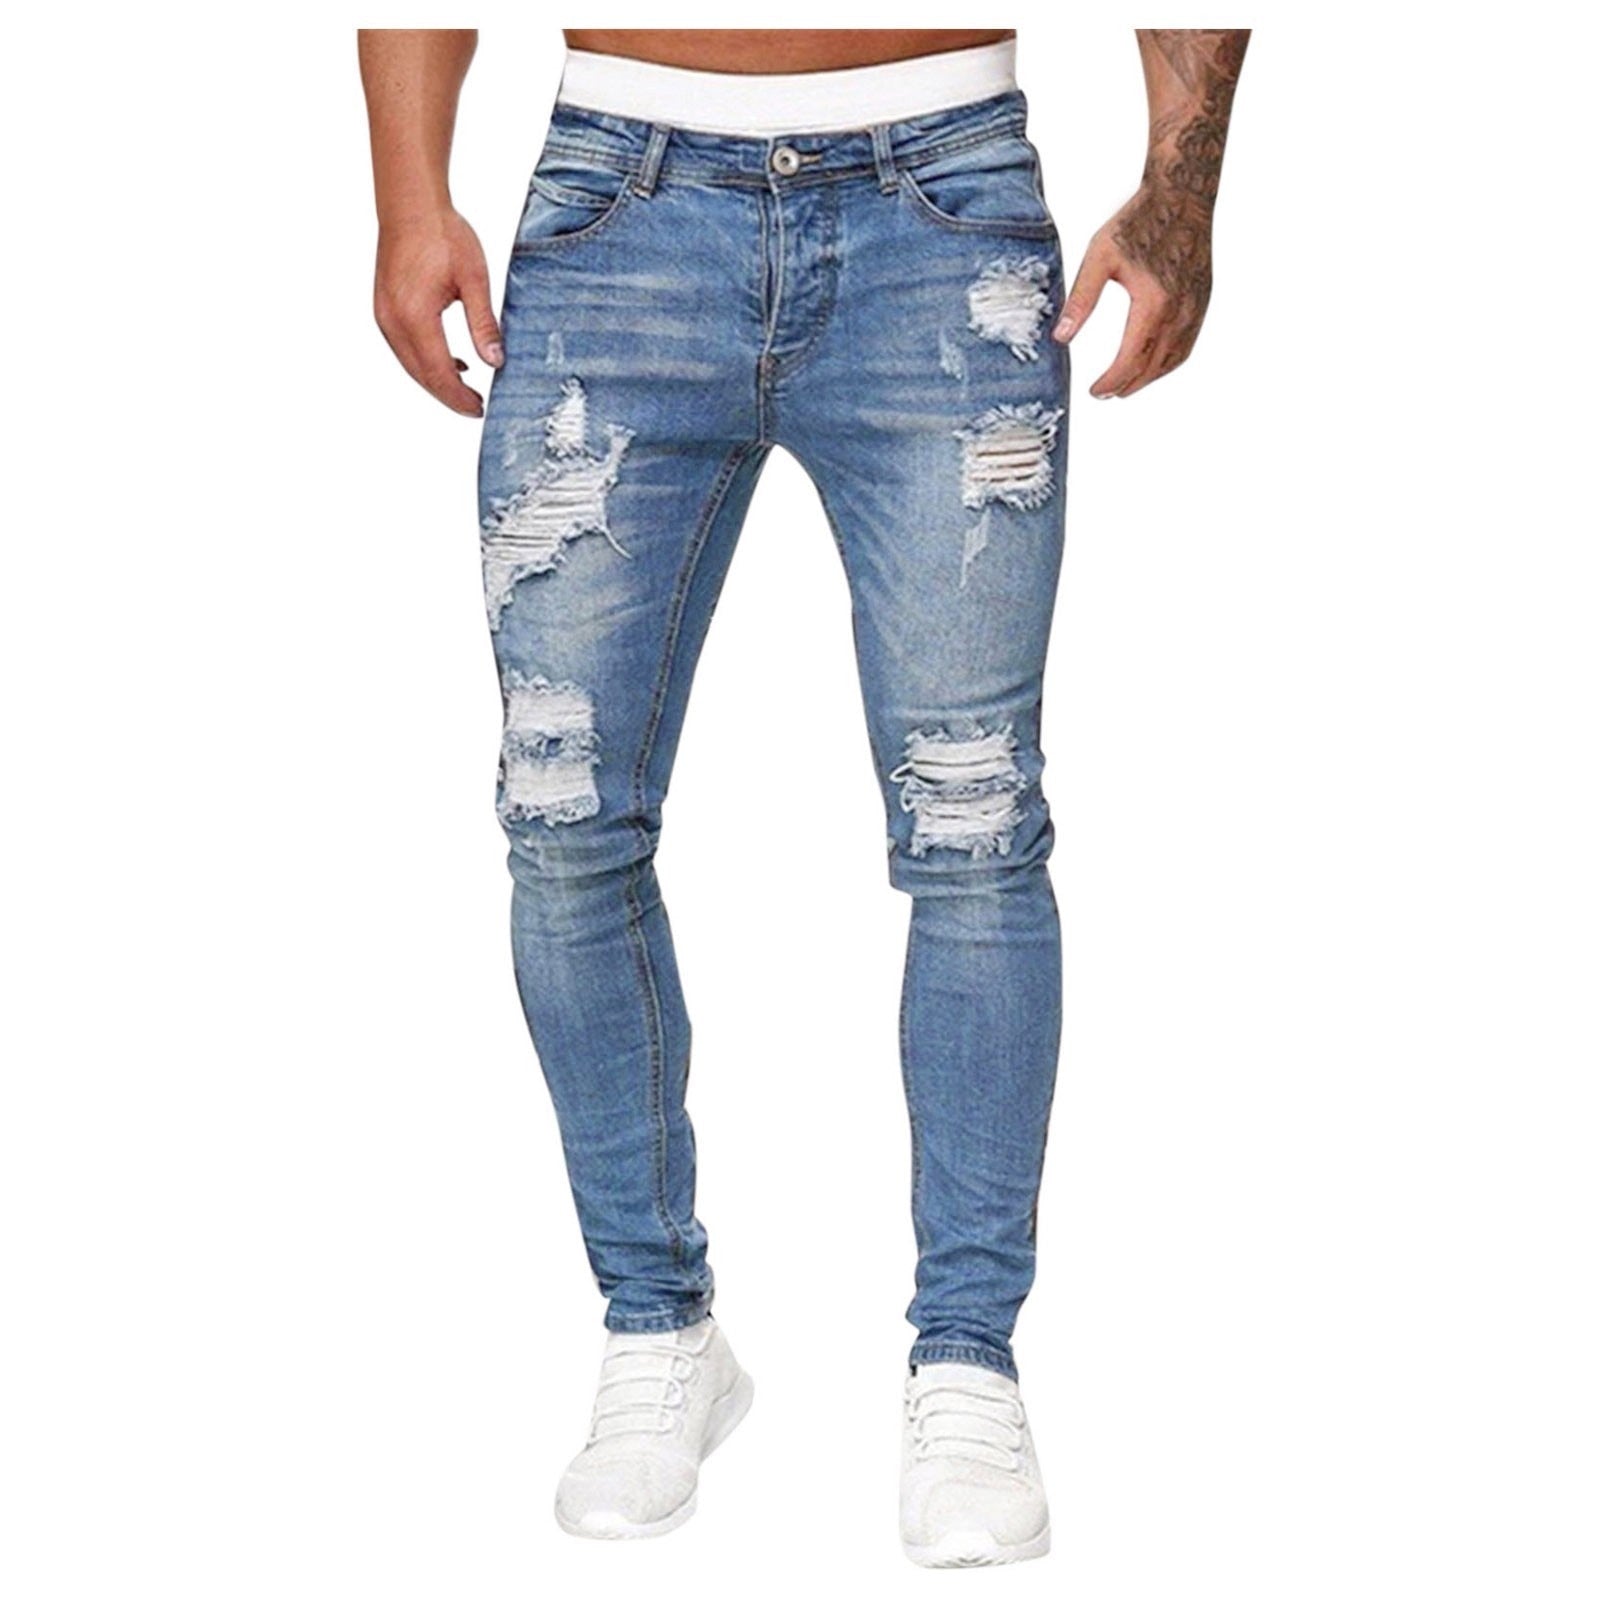 Unleash Your Inner Rebel with Fashion Street Style Ripped Skinny Jeans - Men's Pants-CasualFlowshop 